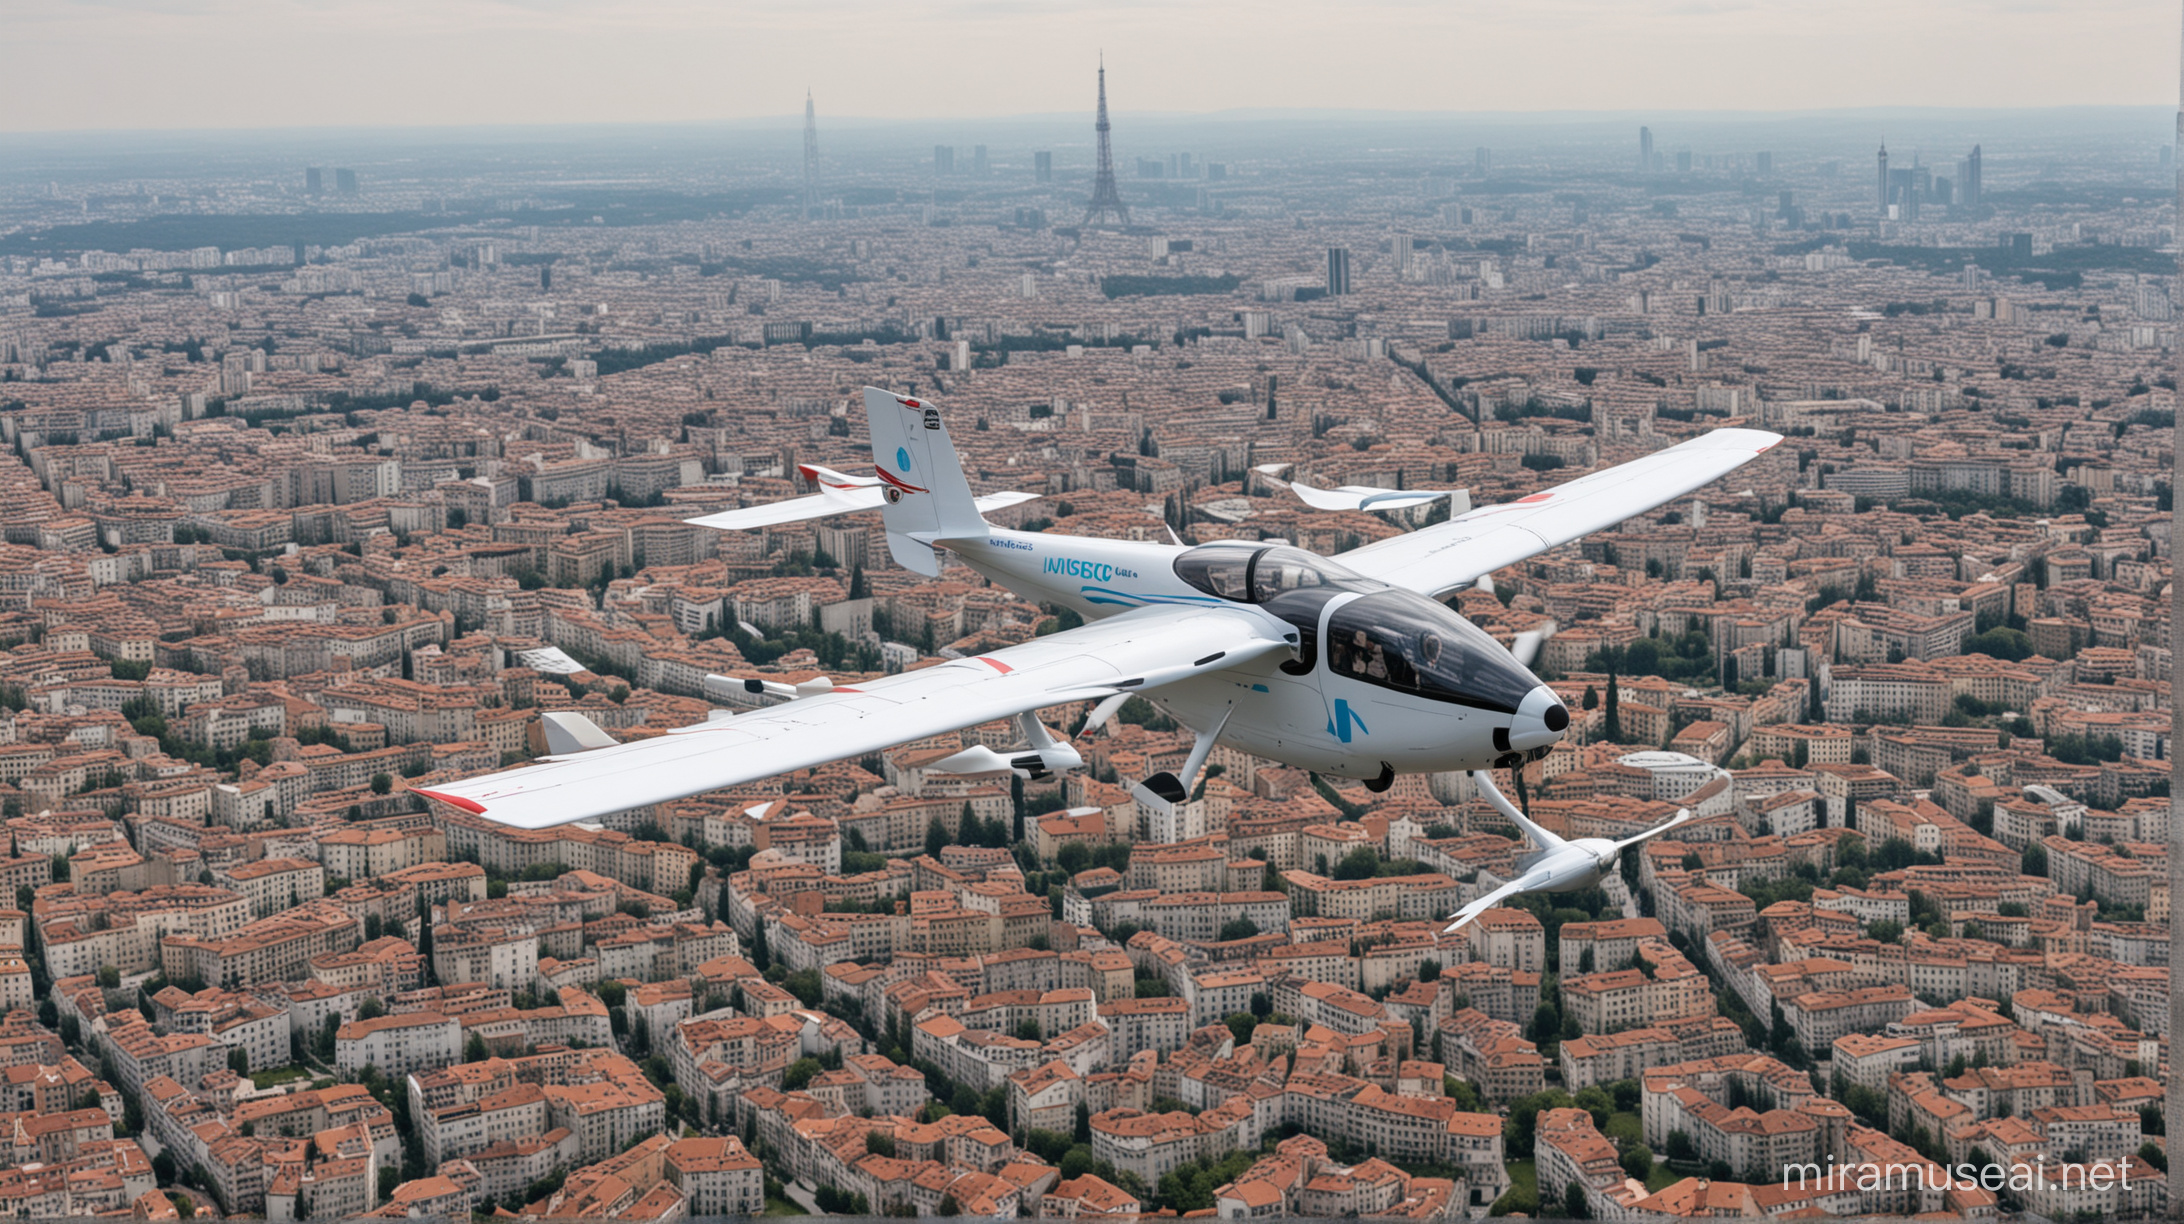 Electric Car Airplane Flying Over UNESCO World Heritage Site